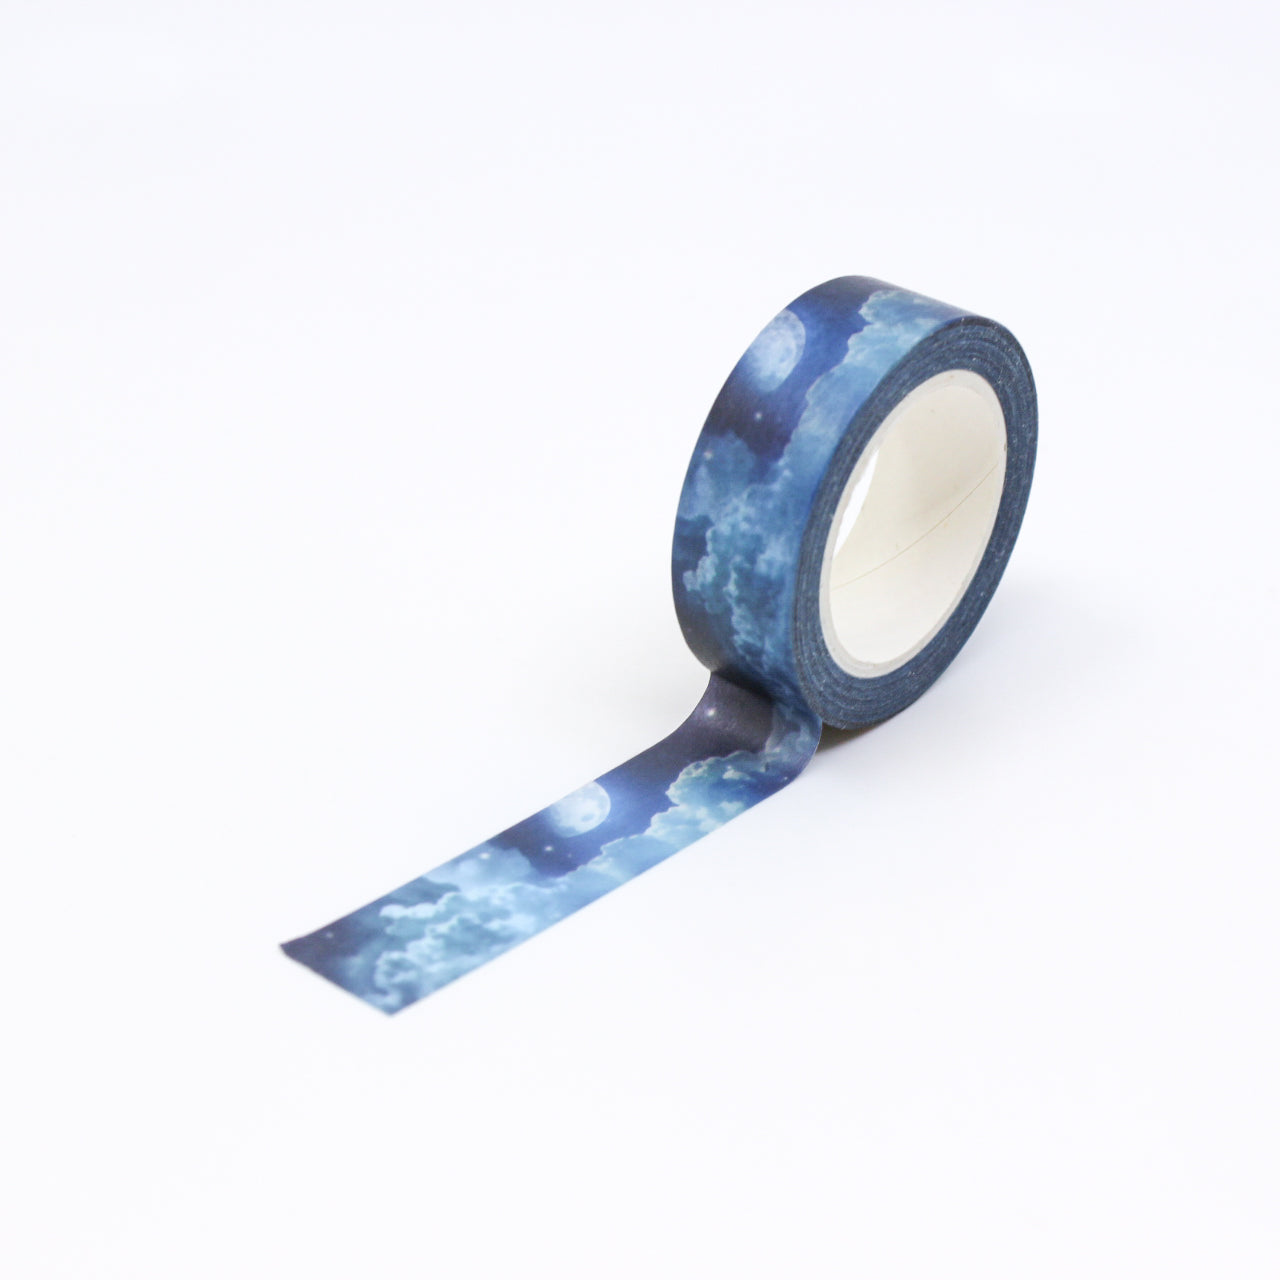 Capture the magic of the night sky with our Full Moon Night Sky Washi Tape, featuring a luminous full moon against a starry backdrop. Perfect for adding a touch of celestial wonder to your projects. This tape is sold at BBB Supplies Craft Shop.